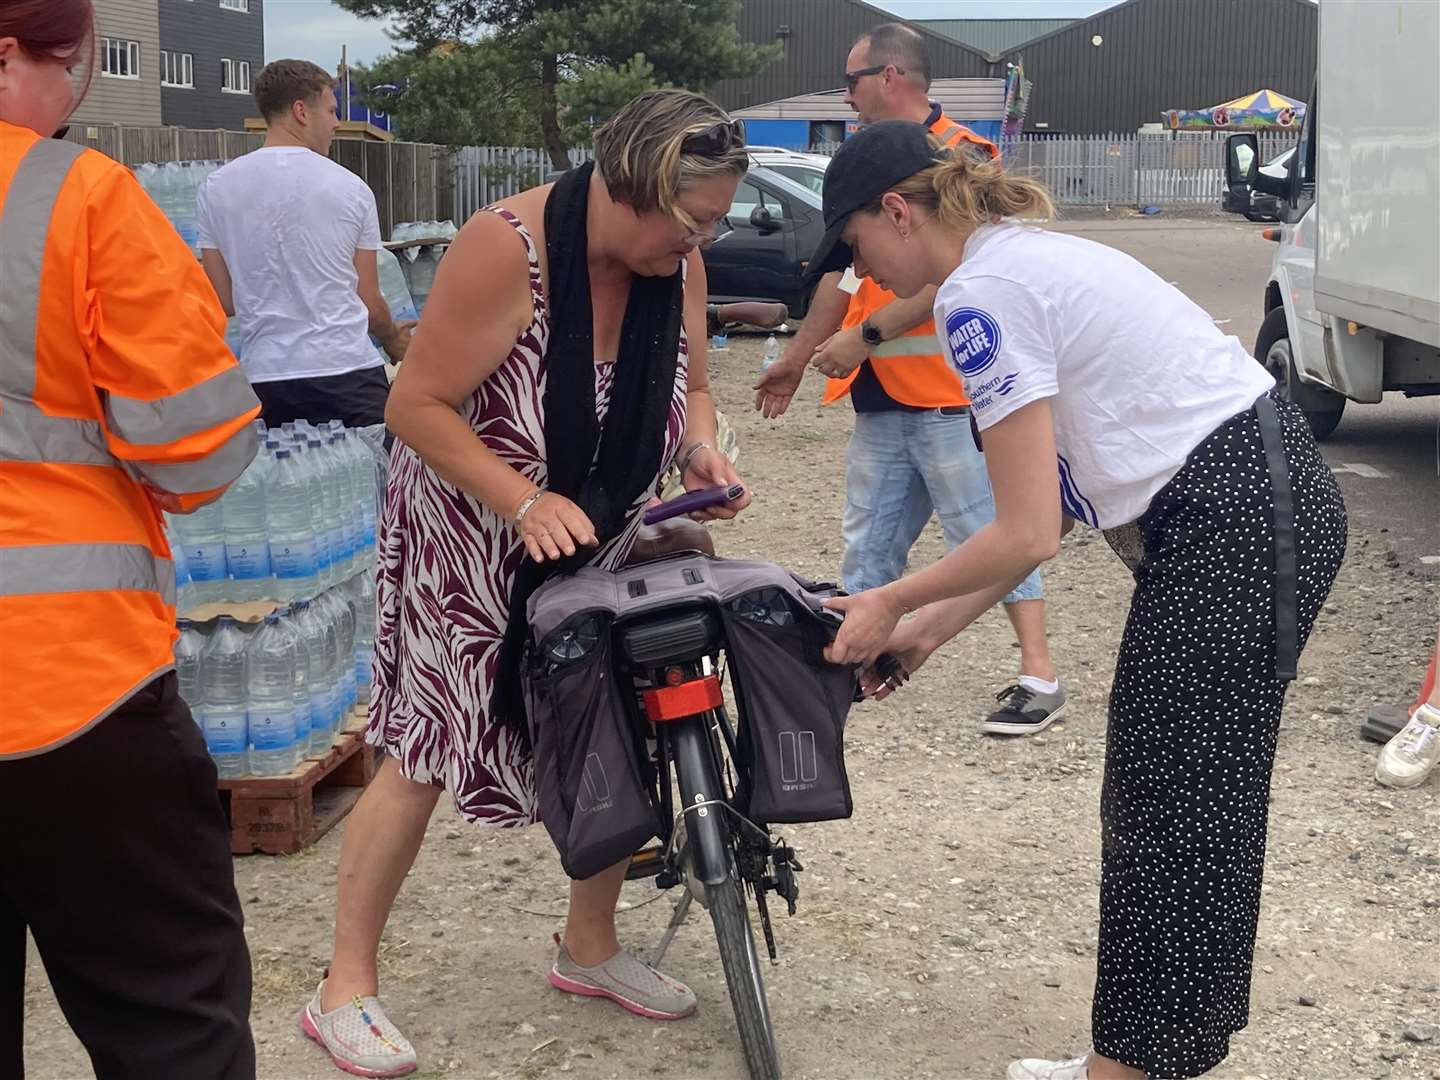 Handing out bottles of water at Leysdown on the Isle of Sheppey in July